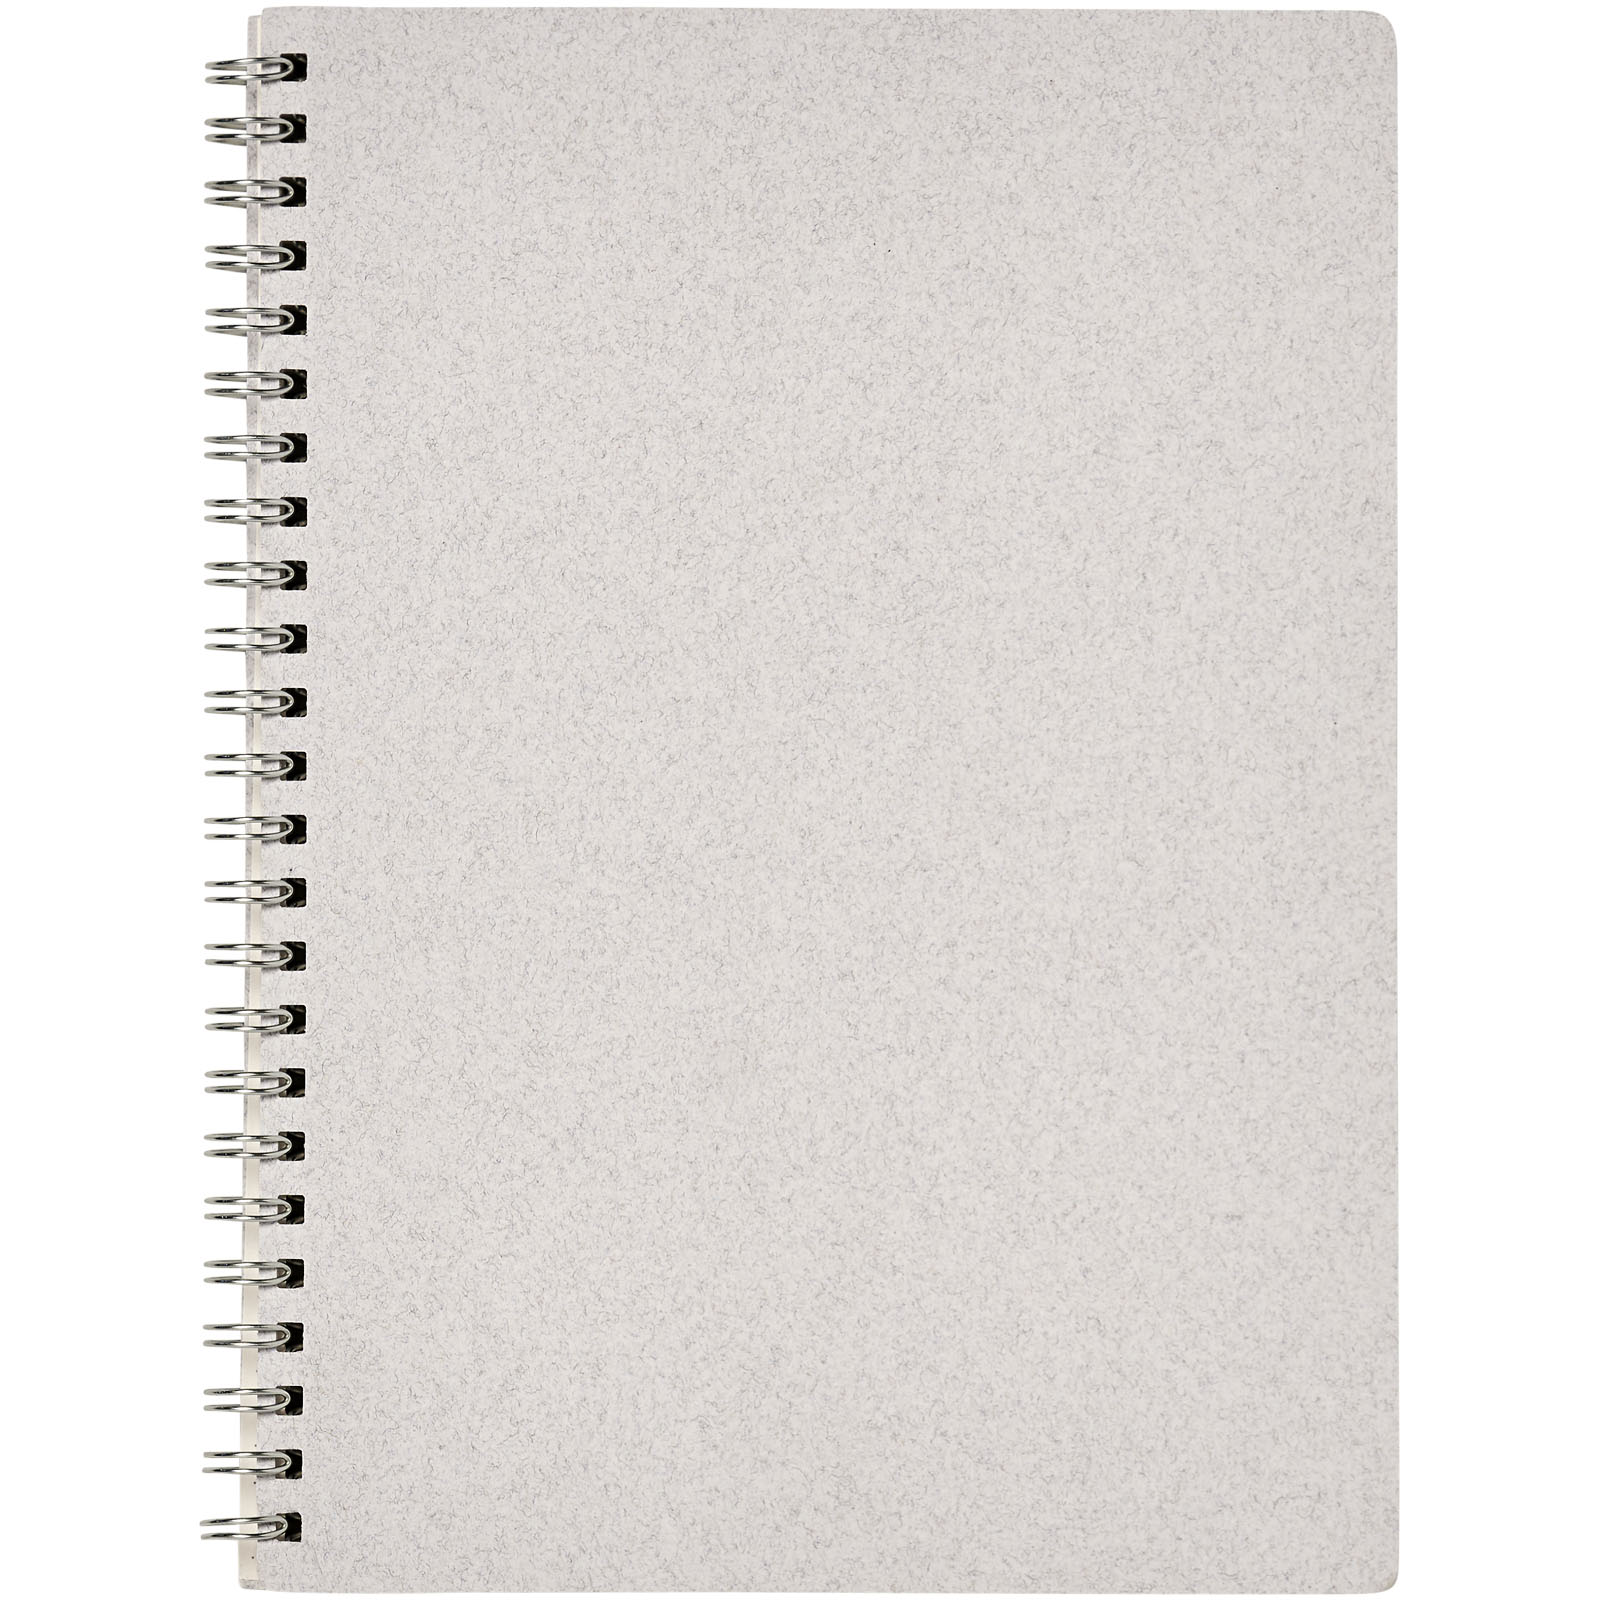 Advertising Notebooks - Bianco A5 size wire-o notebook - 1